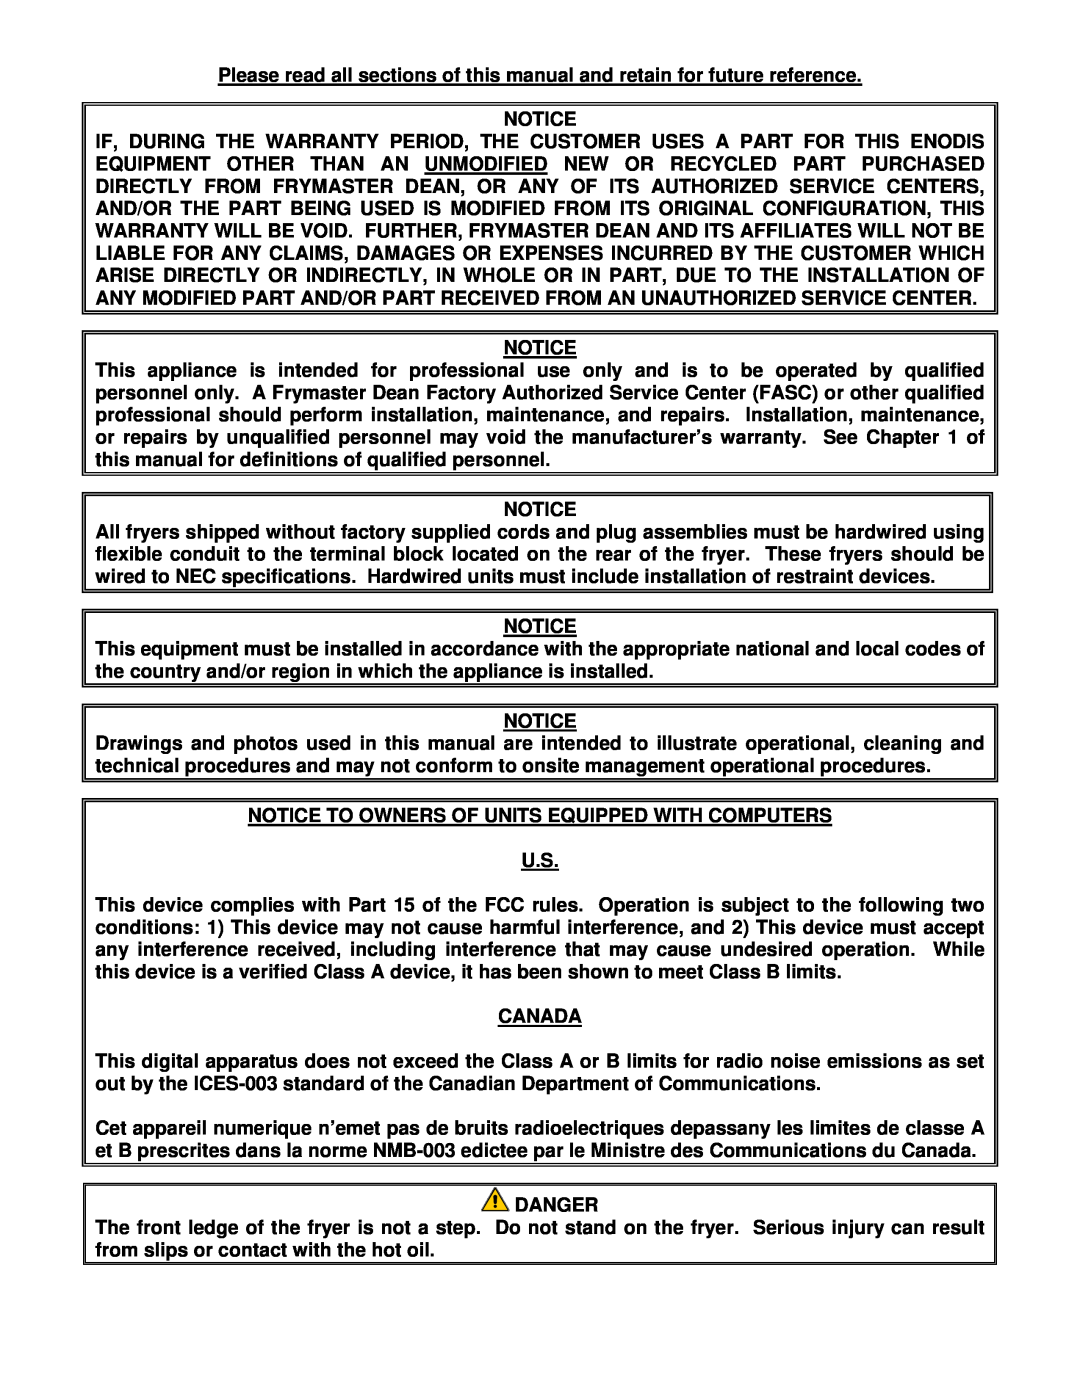 Frymaster H20.5 SERIES manual Notice To Owners Of Units Equipped With Computers U.S, Canada, Danger 